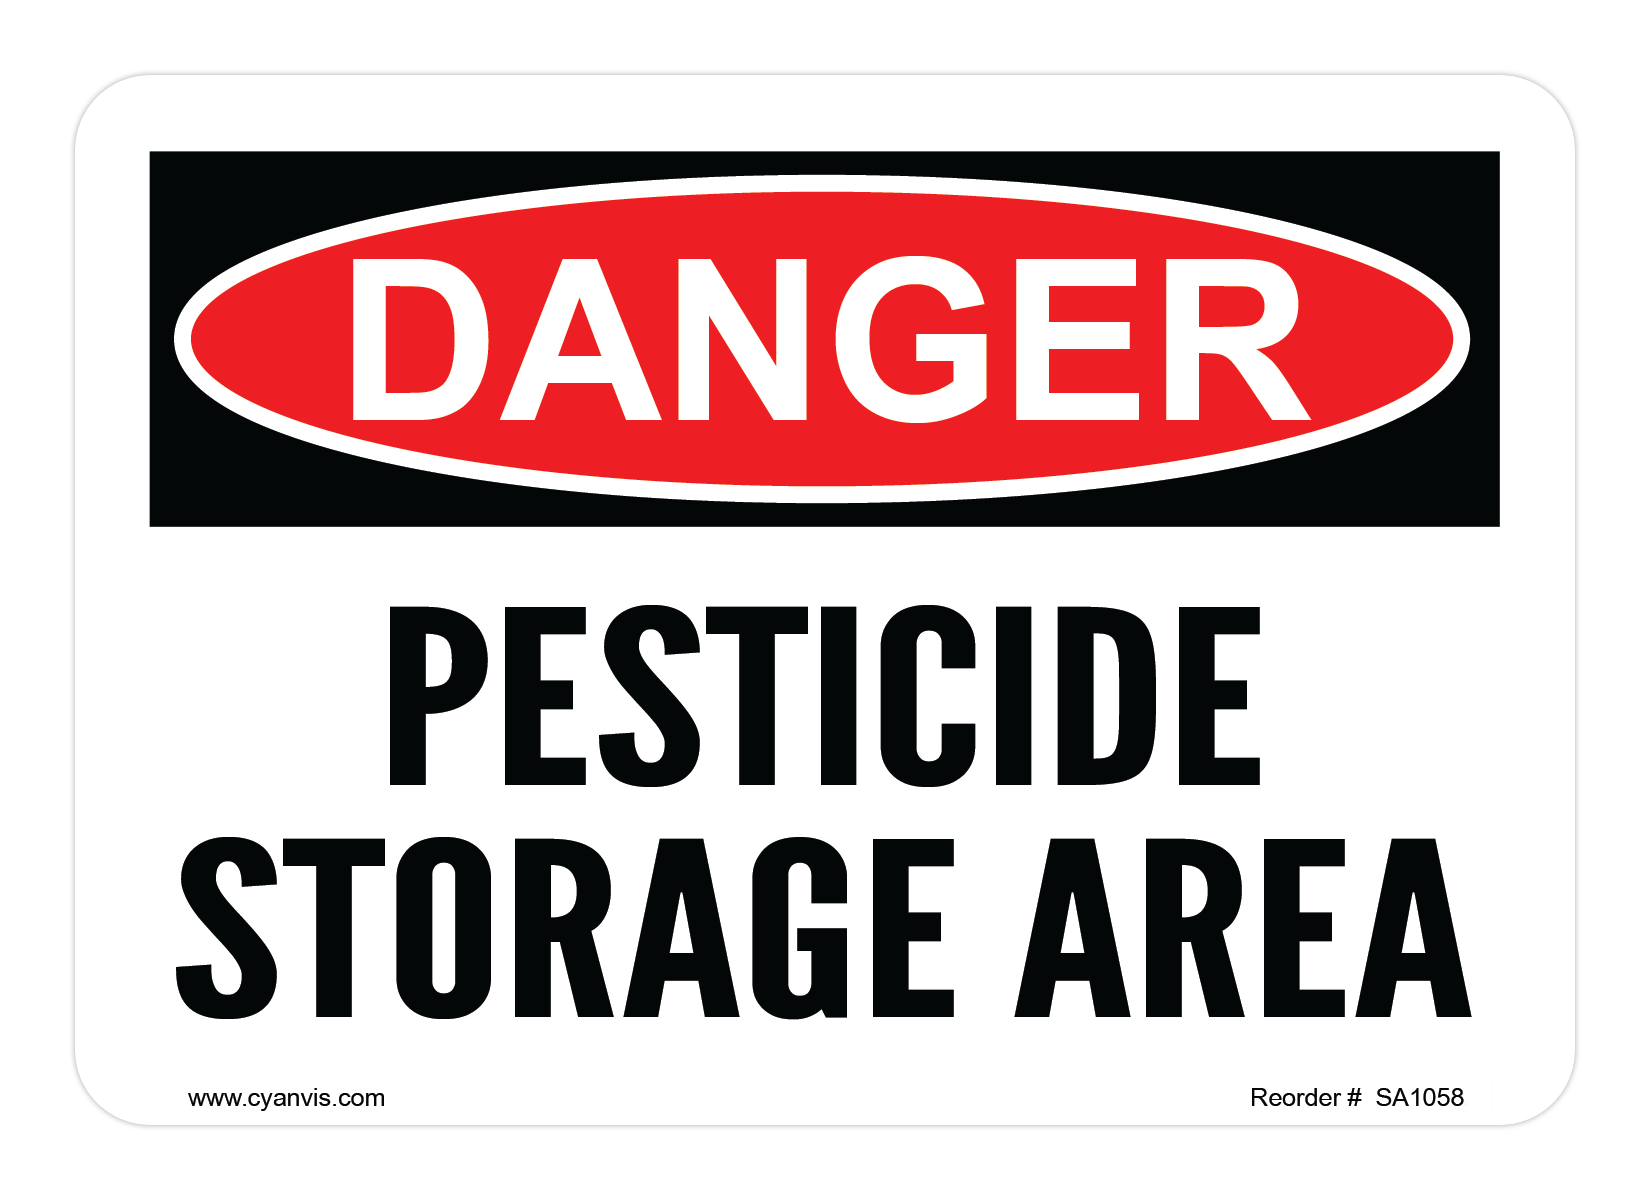 Safety Sign: Danger - PESTICIDE STORAGE AREA - CYANvisuals